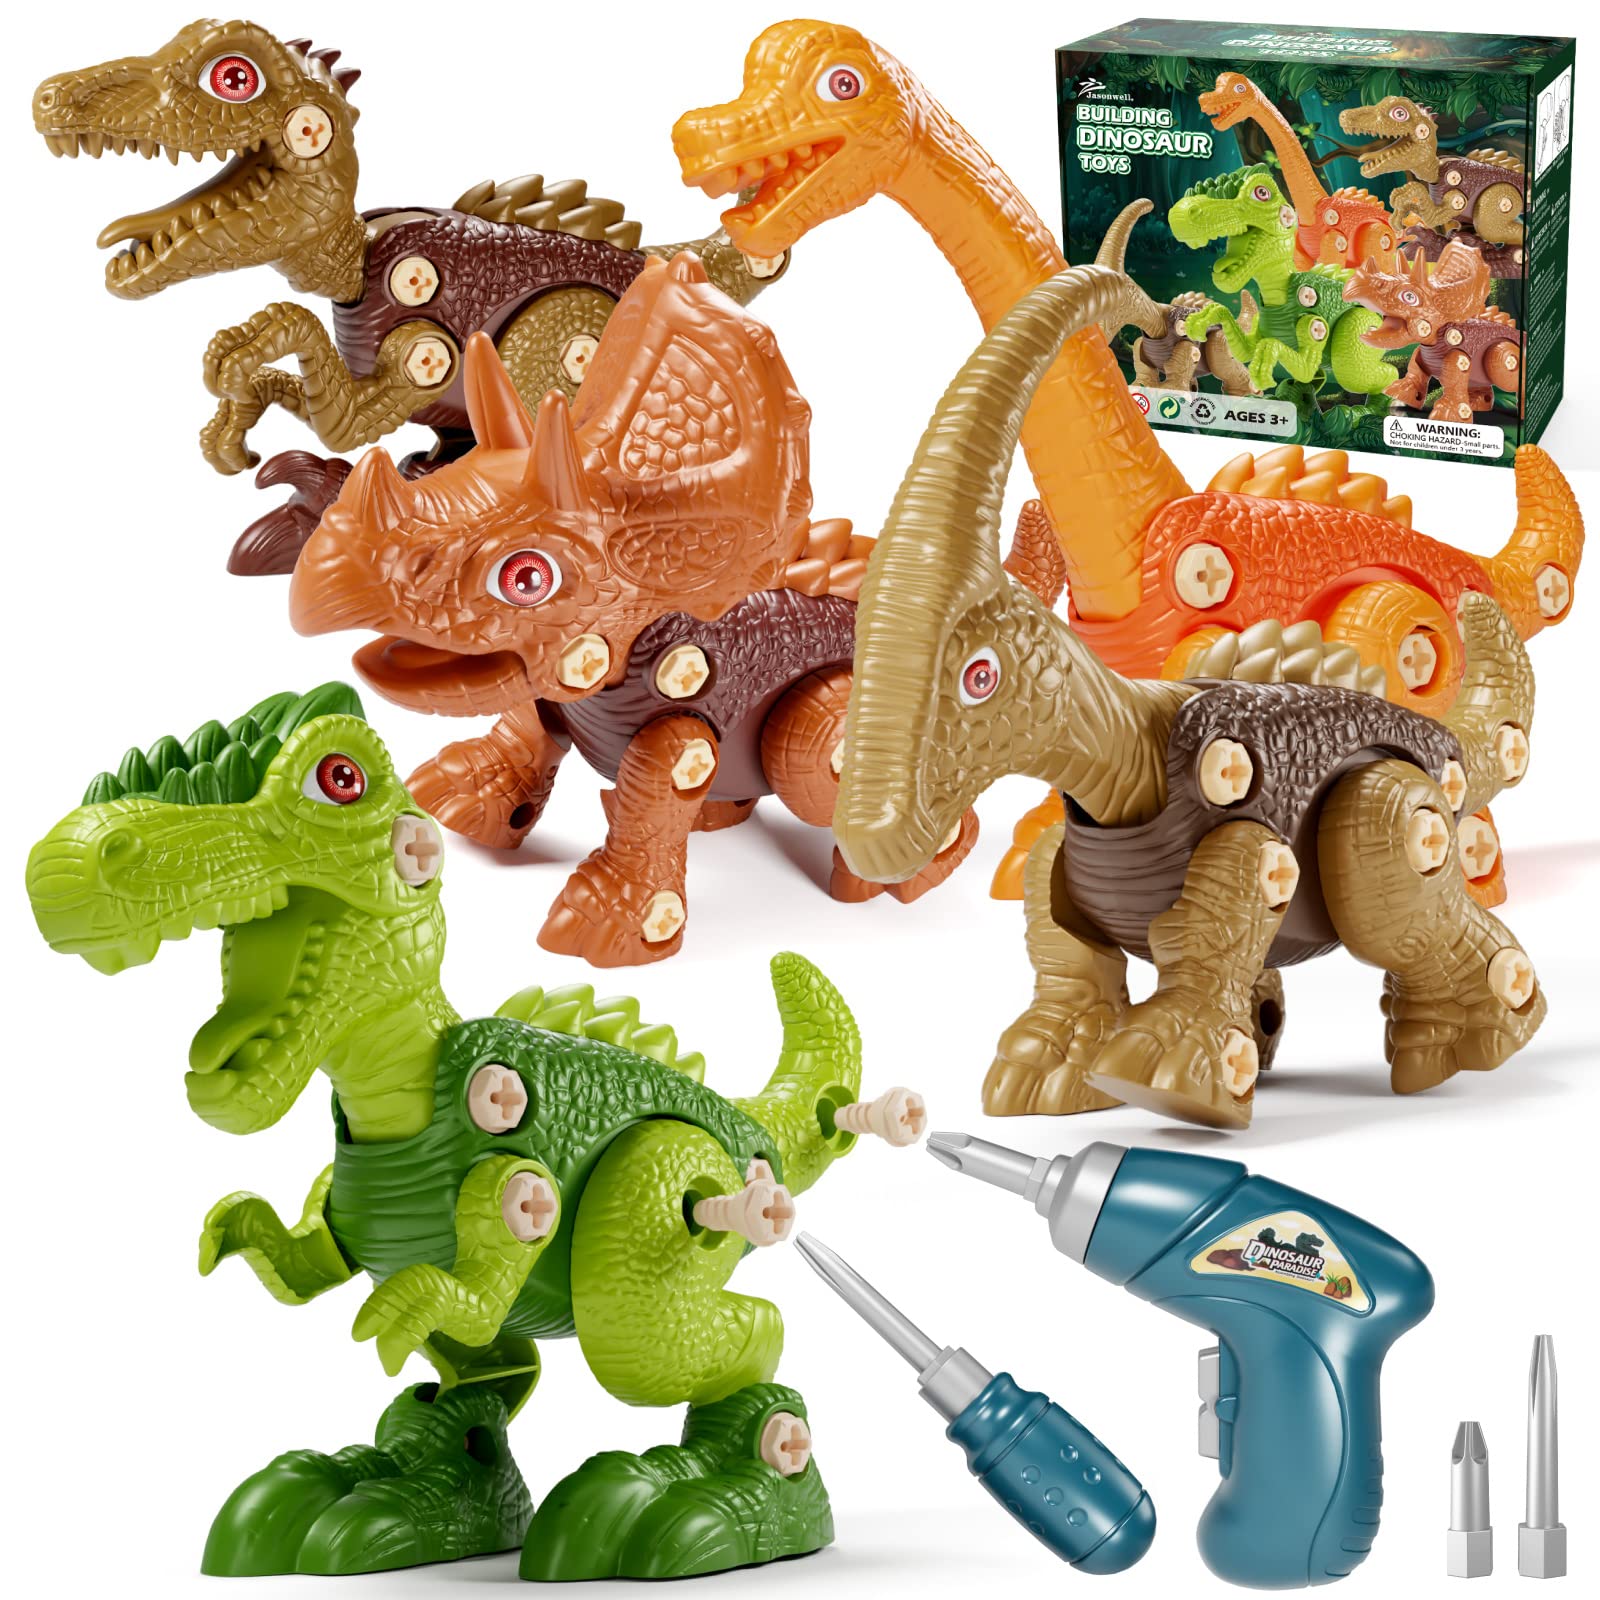 Jasonwell Kids Building Dinosaur Toys - Boys STEM Educational Take Apart Construction Set Learning Kit Creative Activities Games Birthday Gifts for Toddlers Girls Age 3 4 5 6 7 8 Years Old (5PCS)